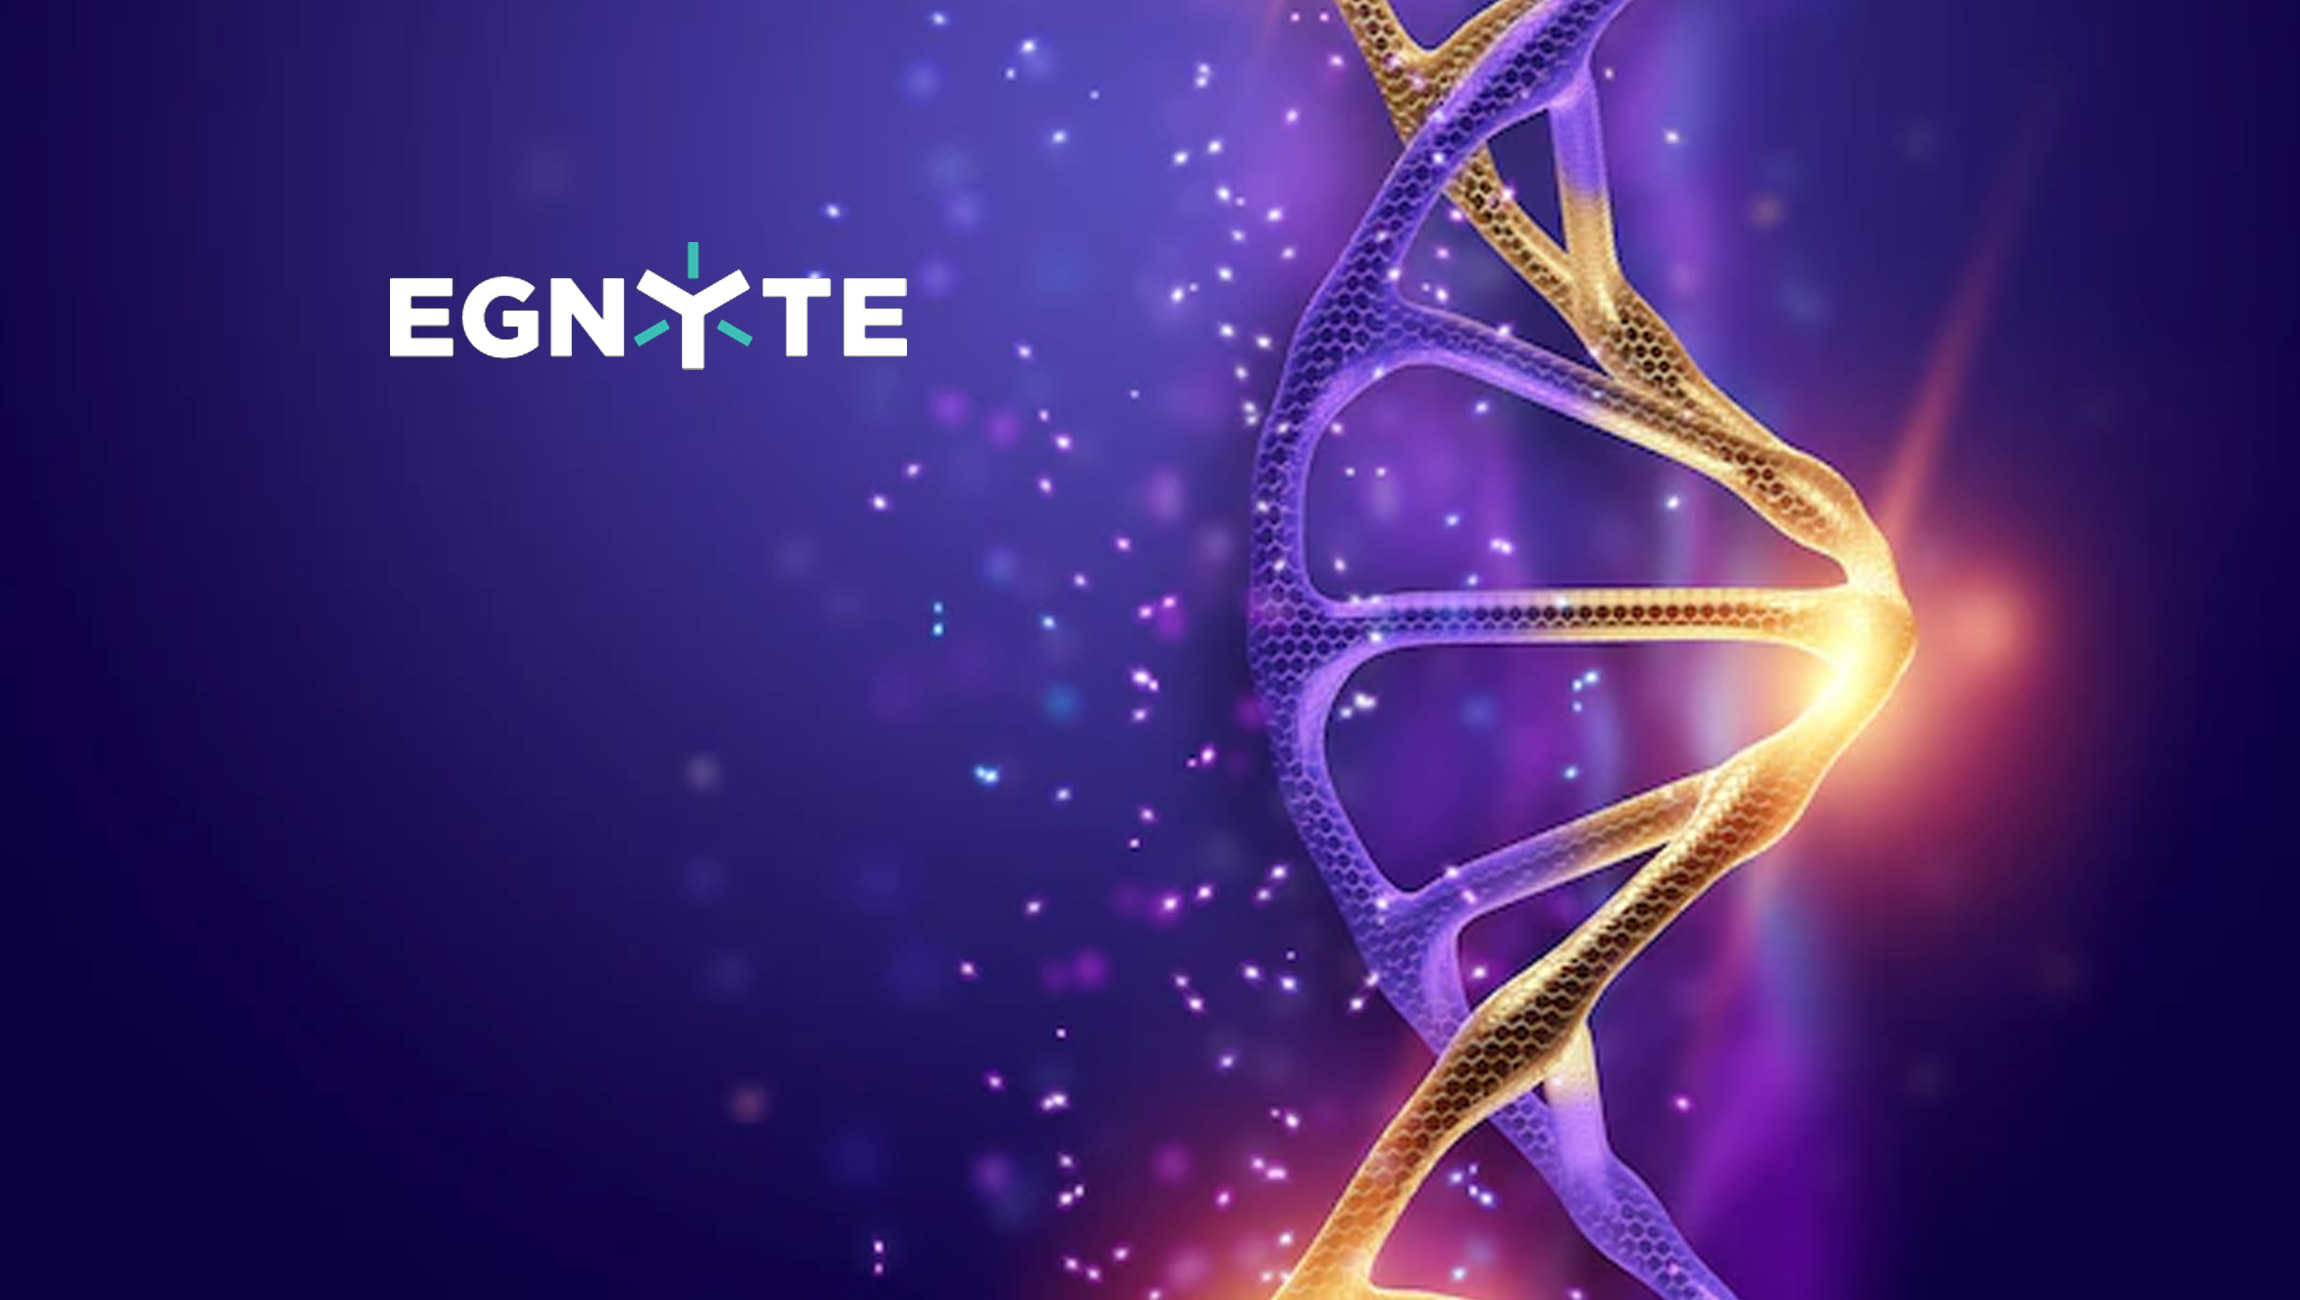 Egnyte to Host Second Annual Life Sciences Summit for Emerging Biotech Companies